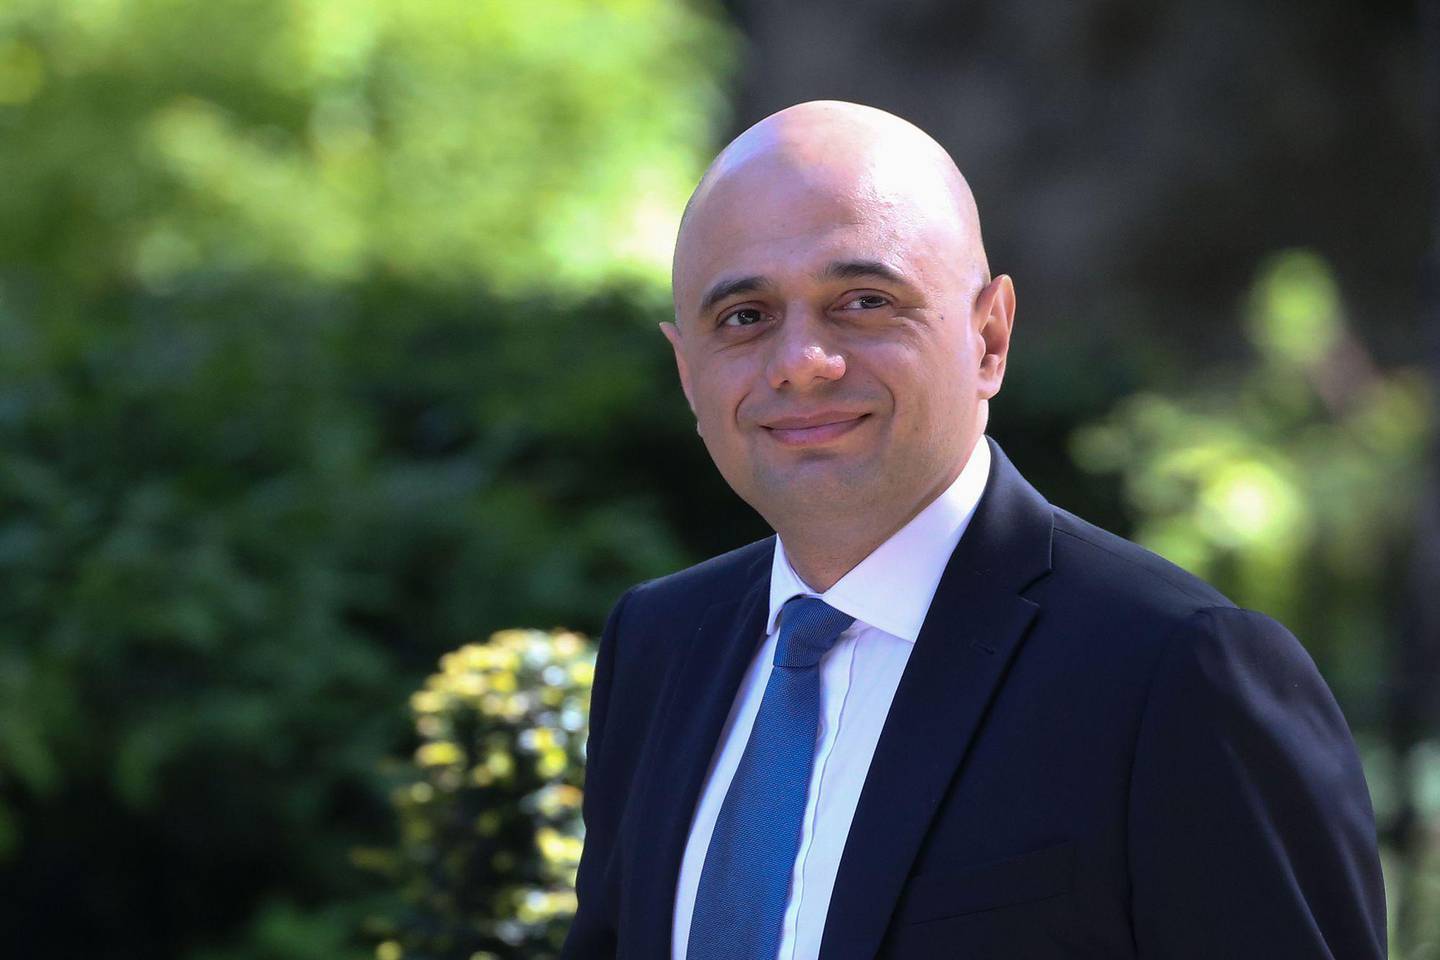 Britain's Home Secretary Sajid Javid arrives to attend the weekly meeting of the Cabinet at 10 Downing Street in central London on May 14, 2019. (Photo by Isabel Infantes / AFP)